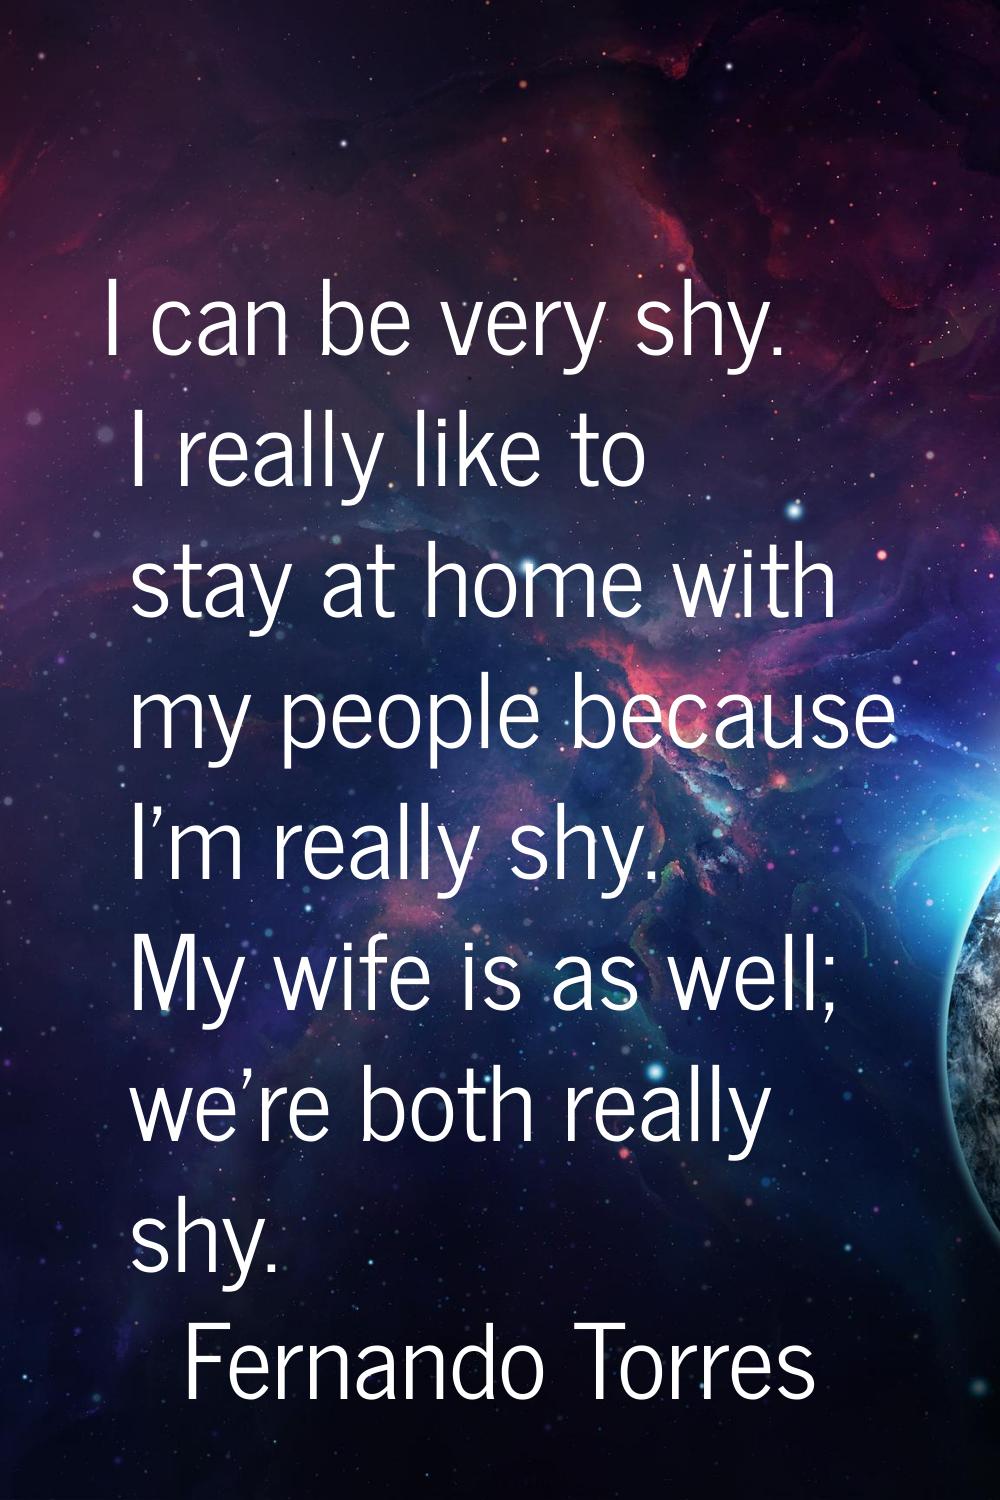 I can be very shy. I really like to stay at home with my people because I'm really shy. My wife is 